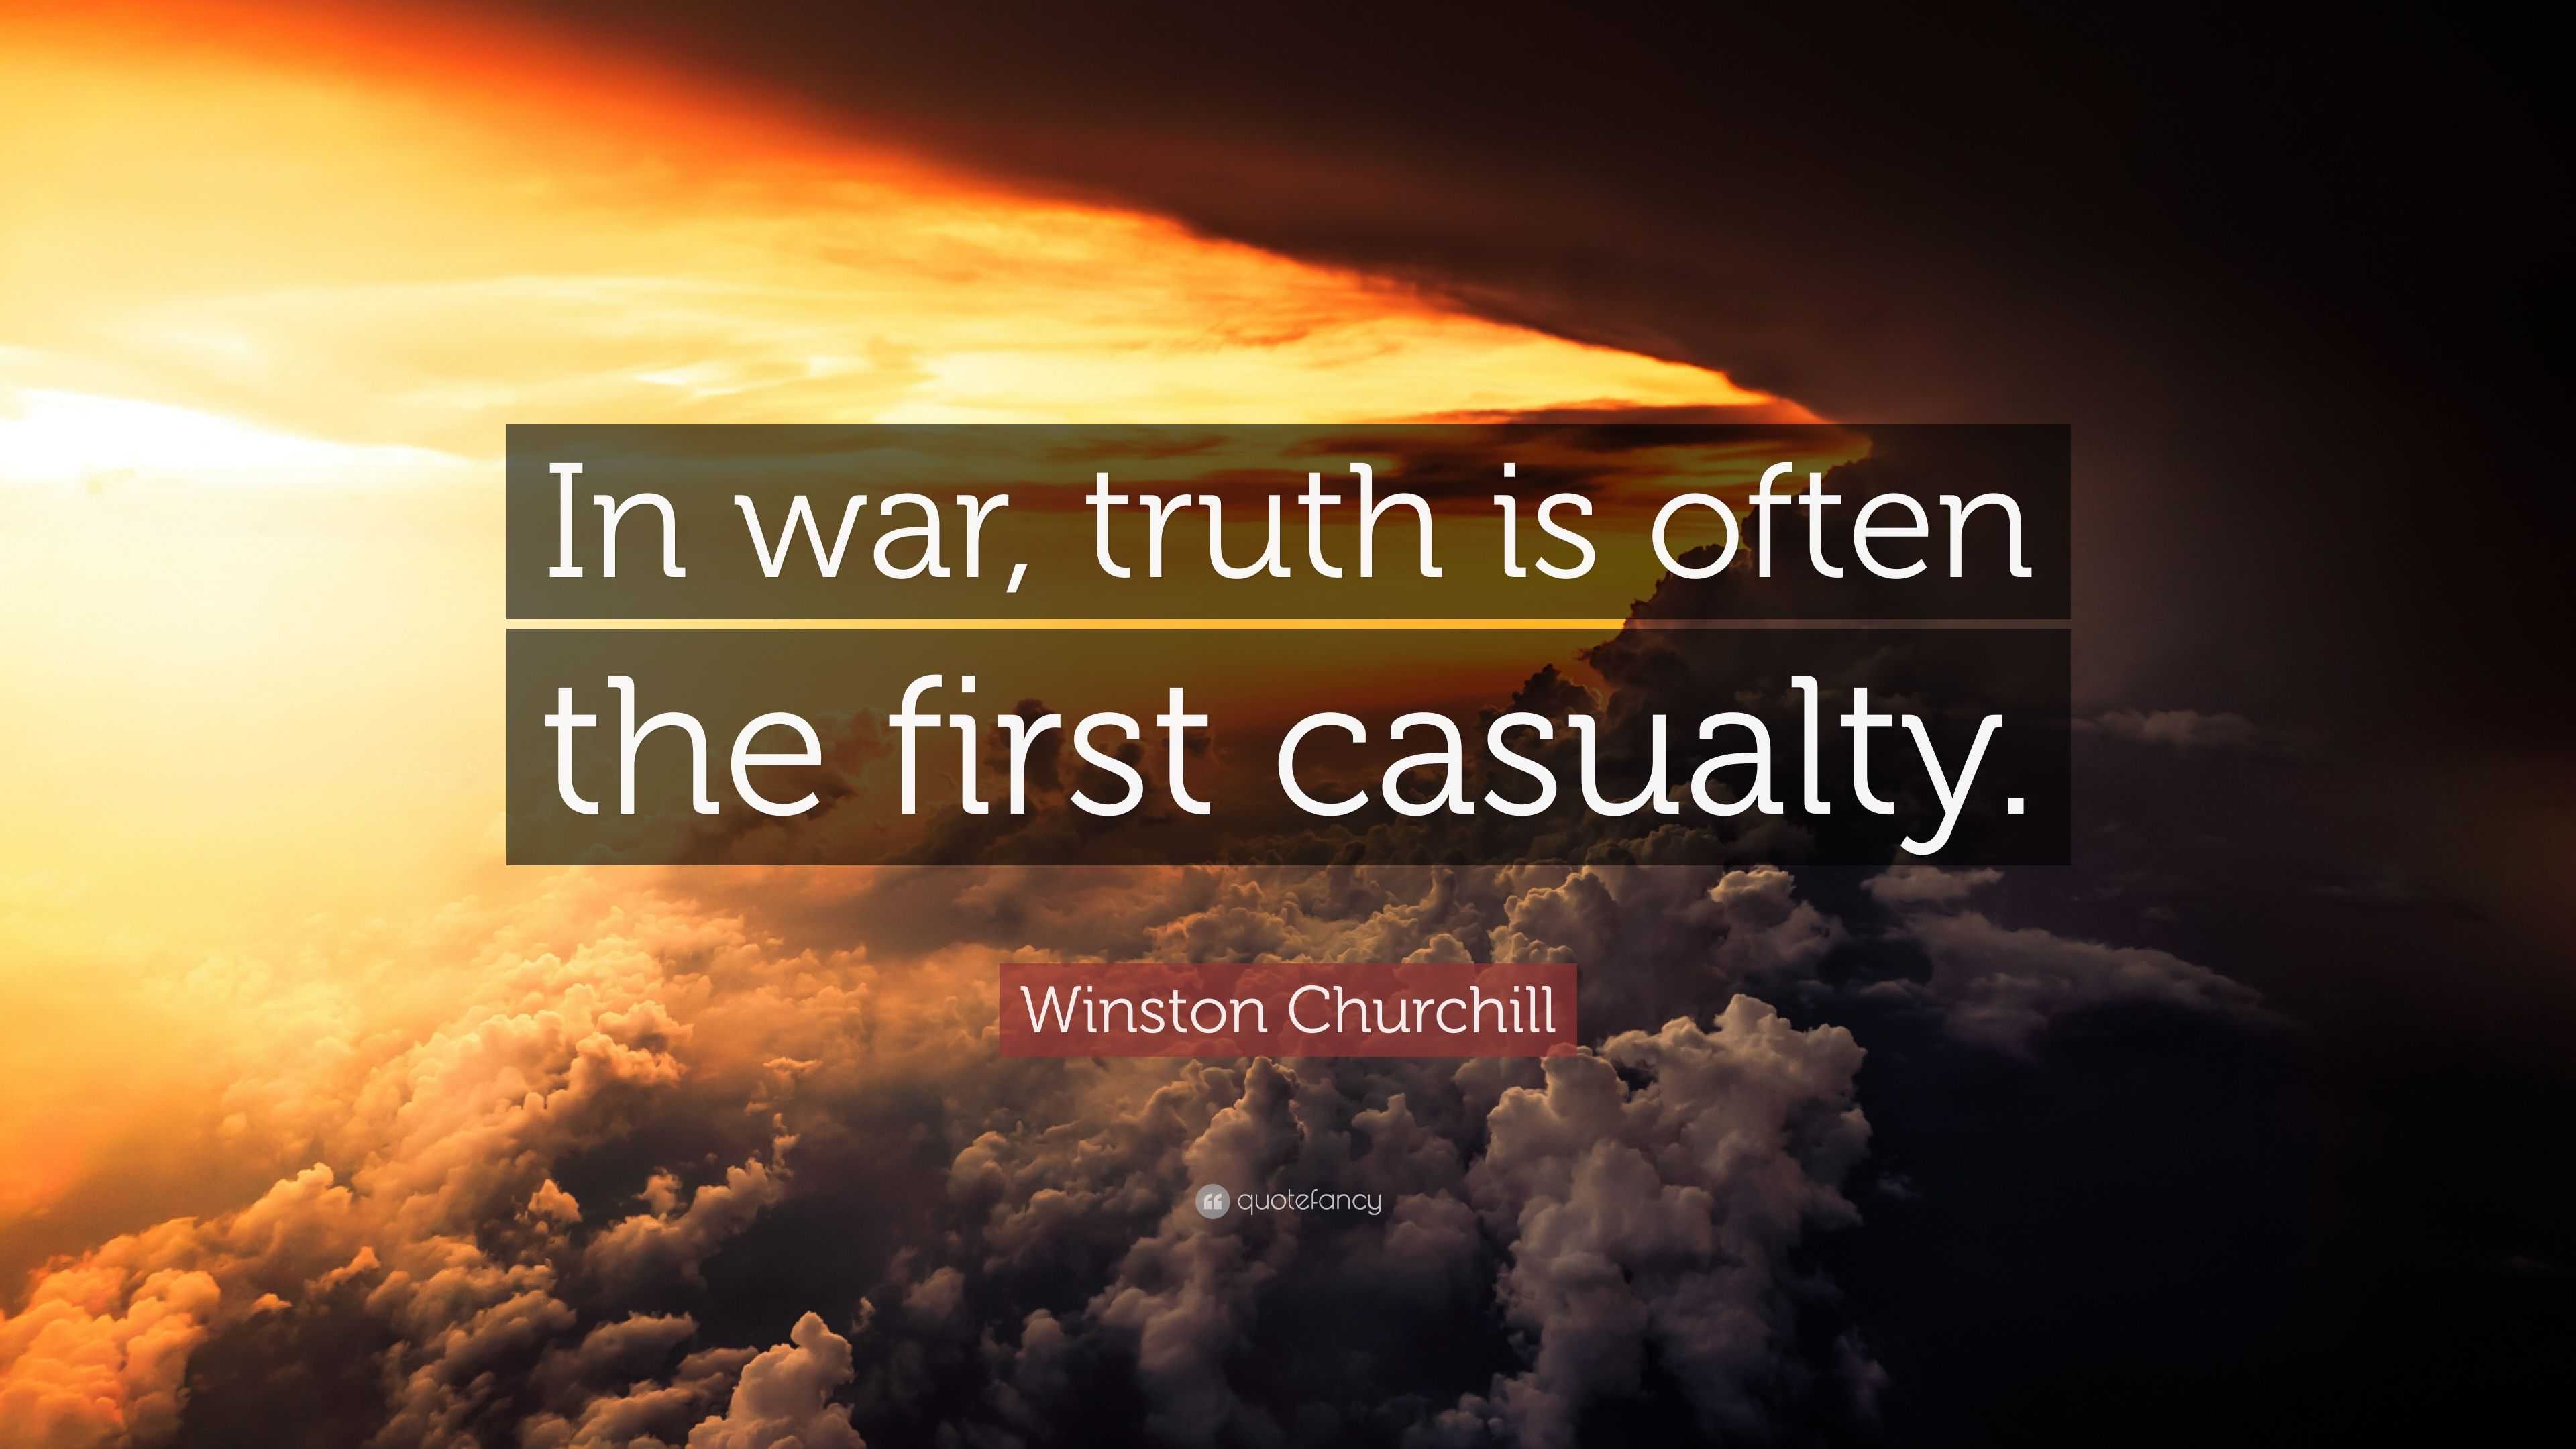 Winston Churchill Quote: "In war, truth is often the first ...